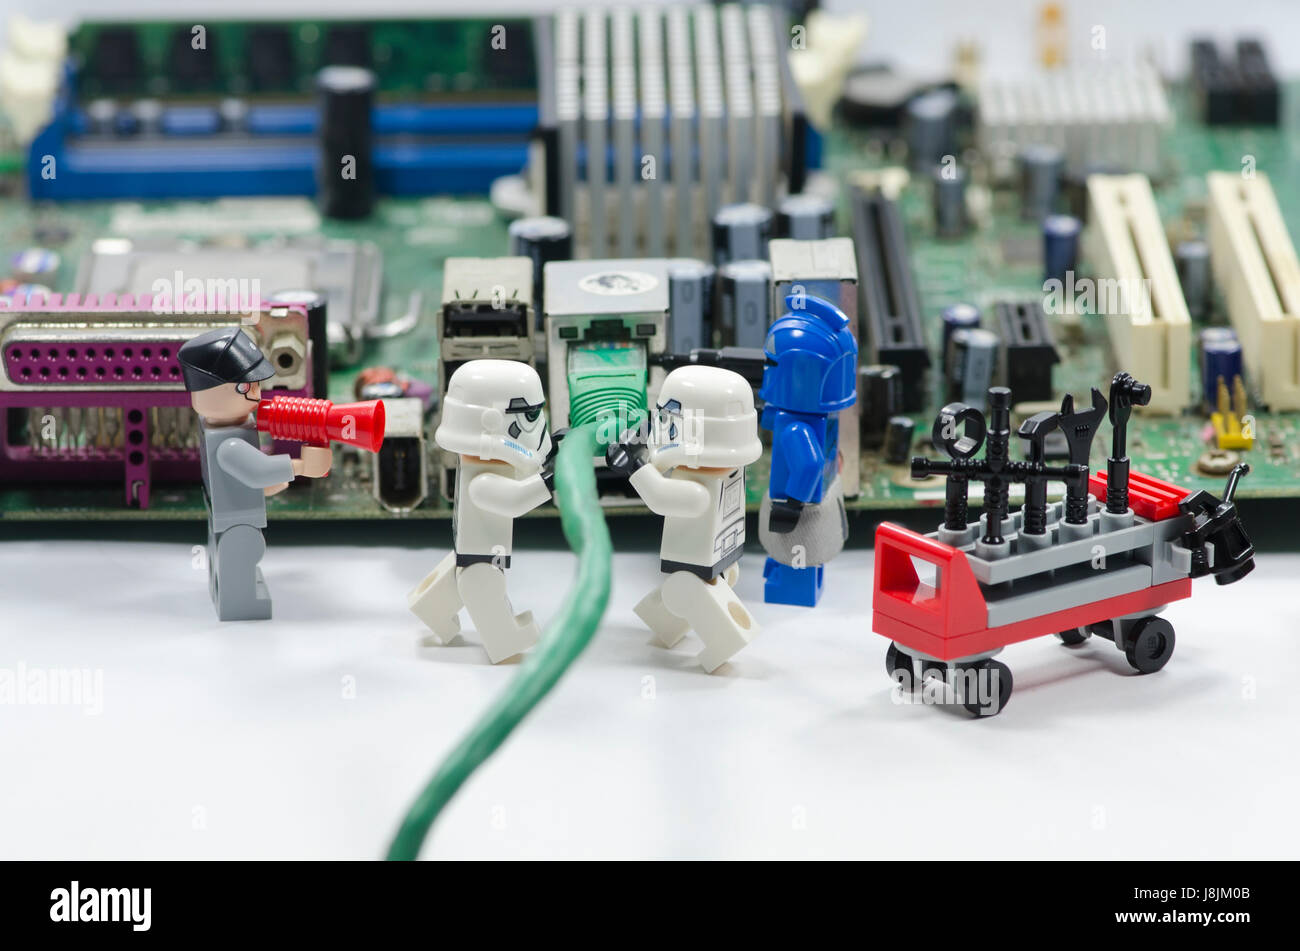 lego storm troopers minifigures plug in internet cable on computer mainboard Photo - Alamy